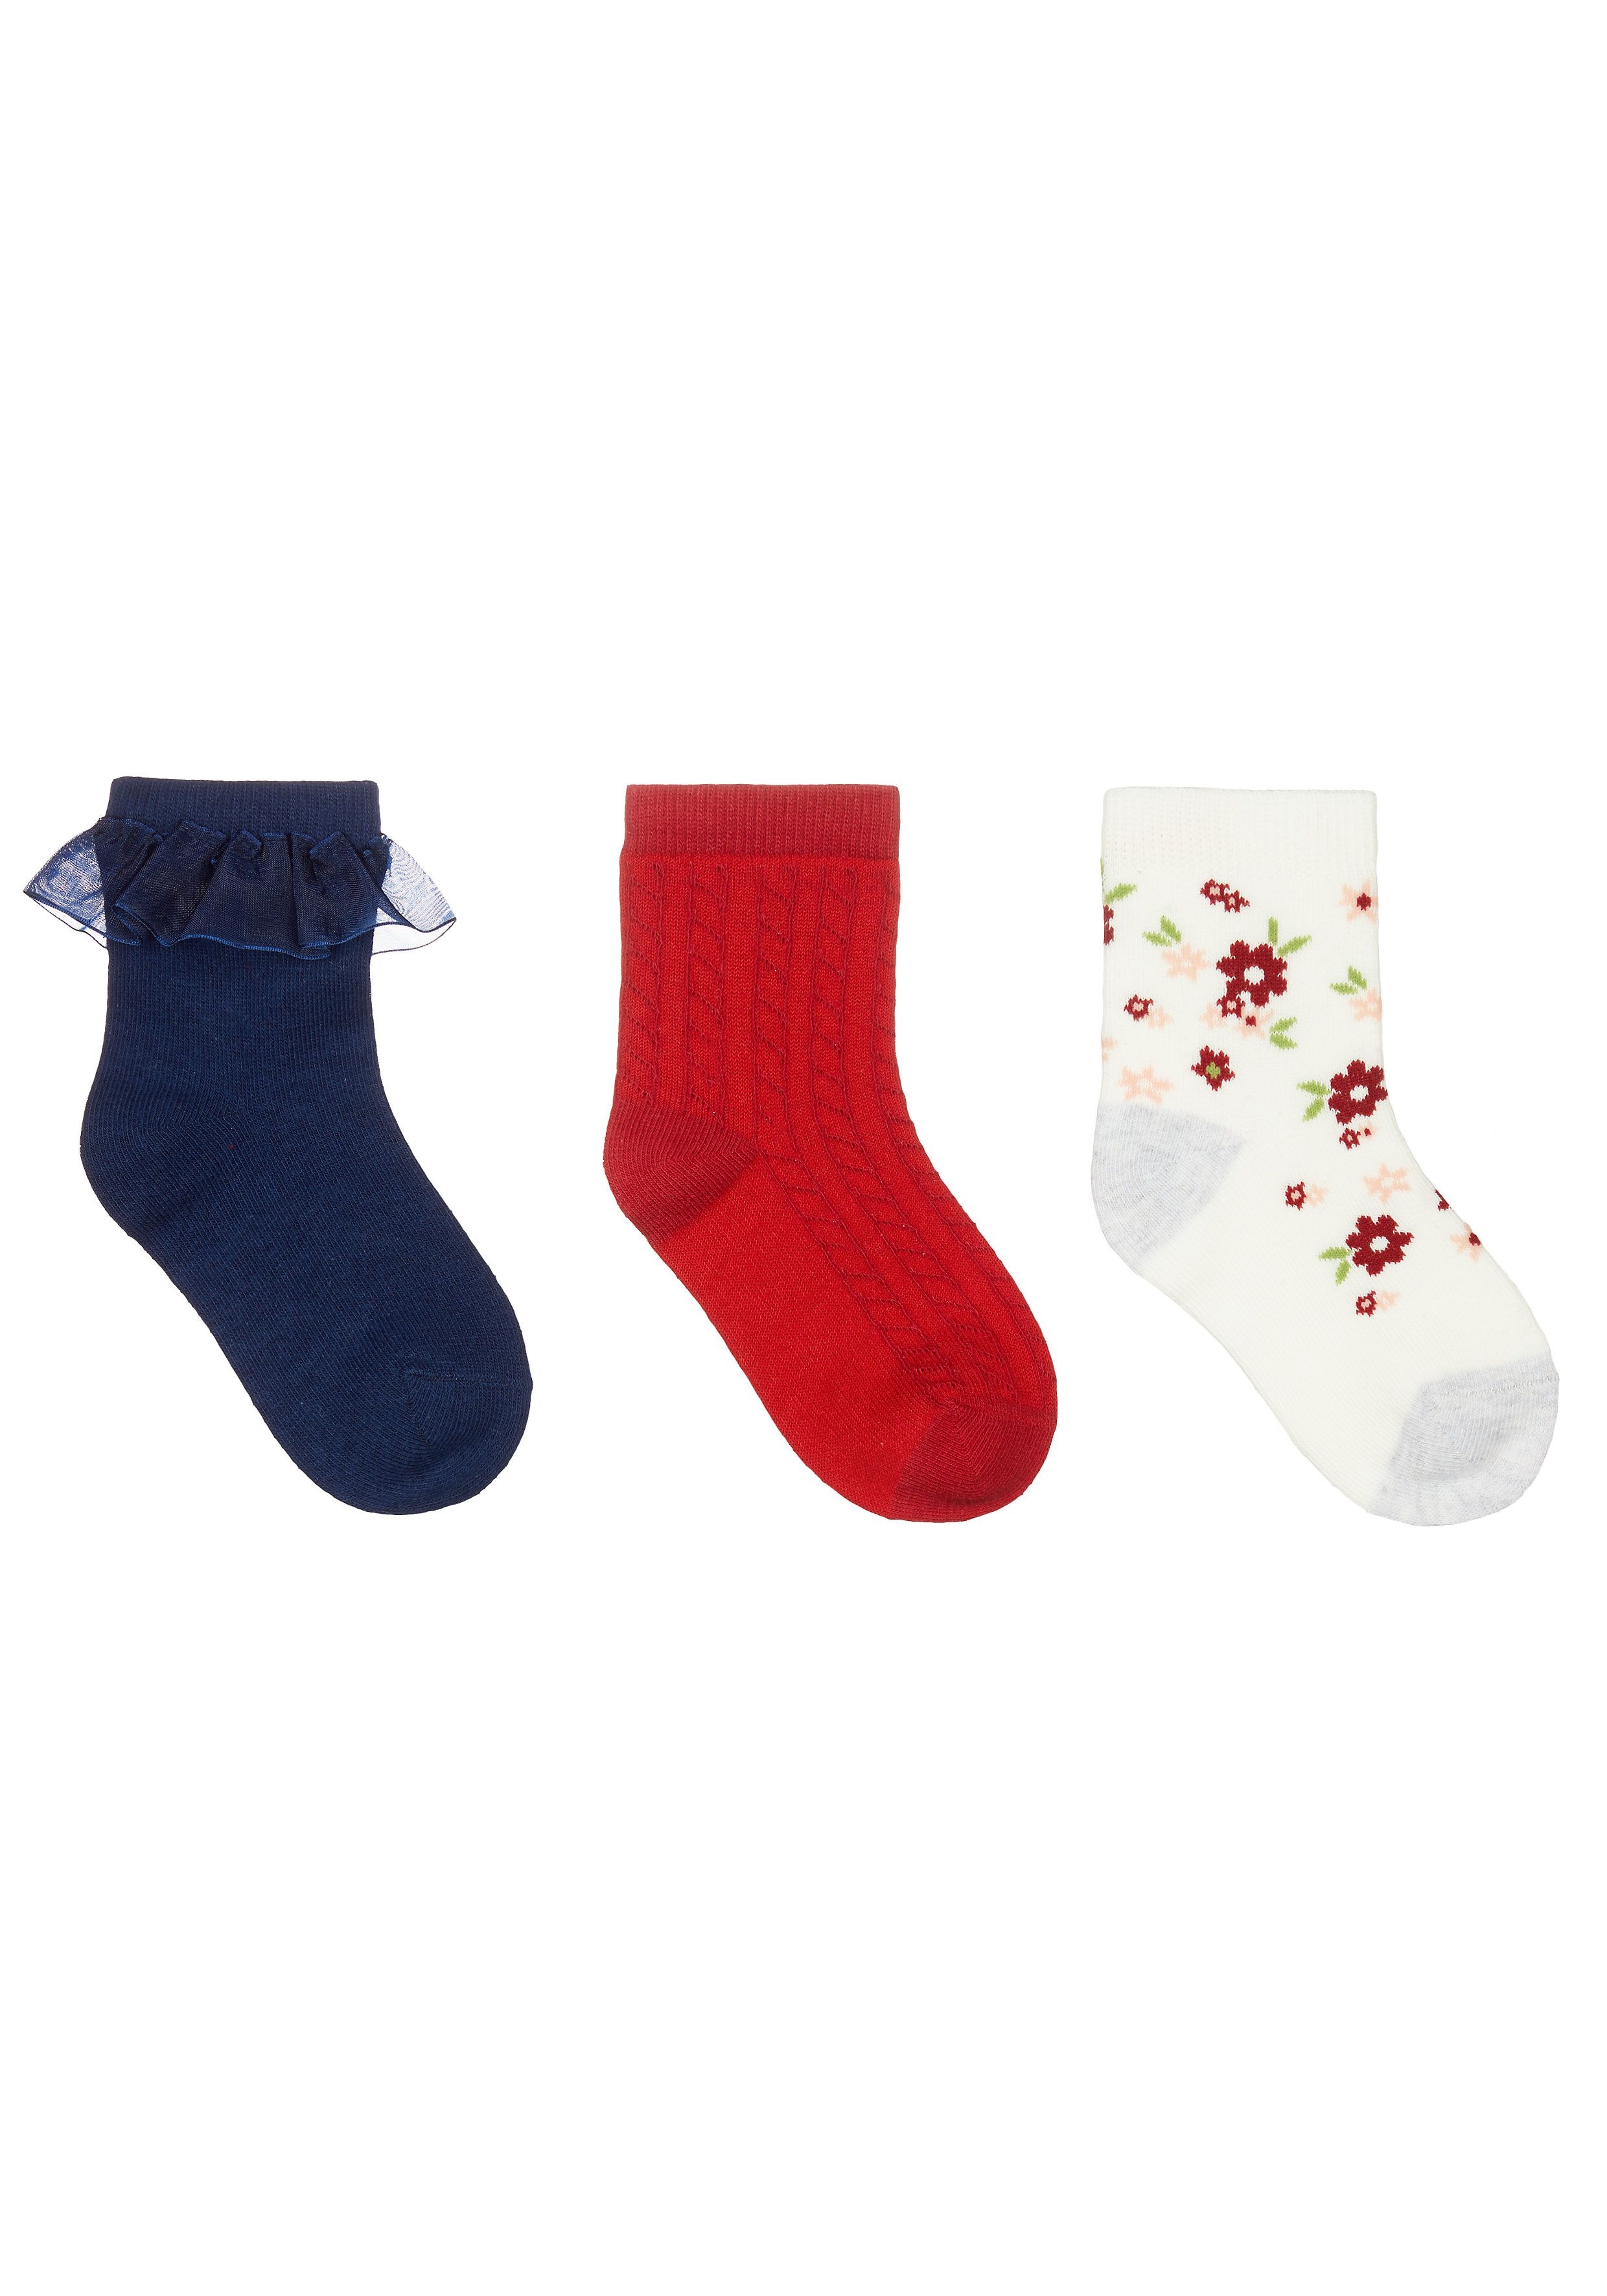 Mothercare | Girls Floral, Navy And Red Baby Socks - 3 Pack - Multicolor